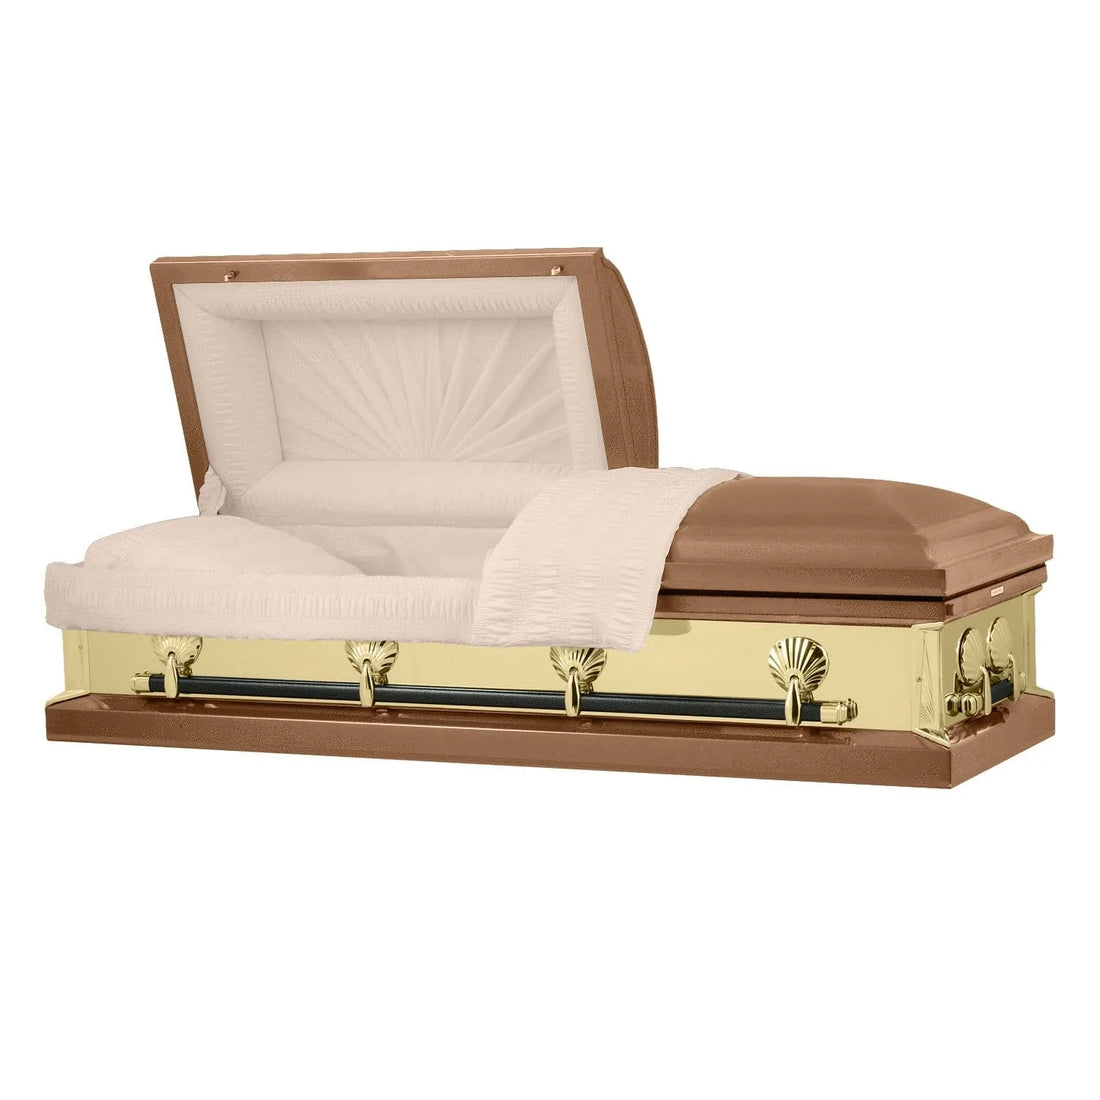 When And How To Buy A Copper Color Casket?